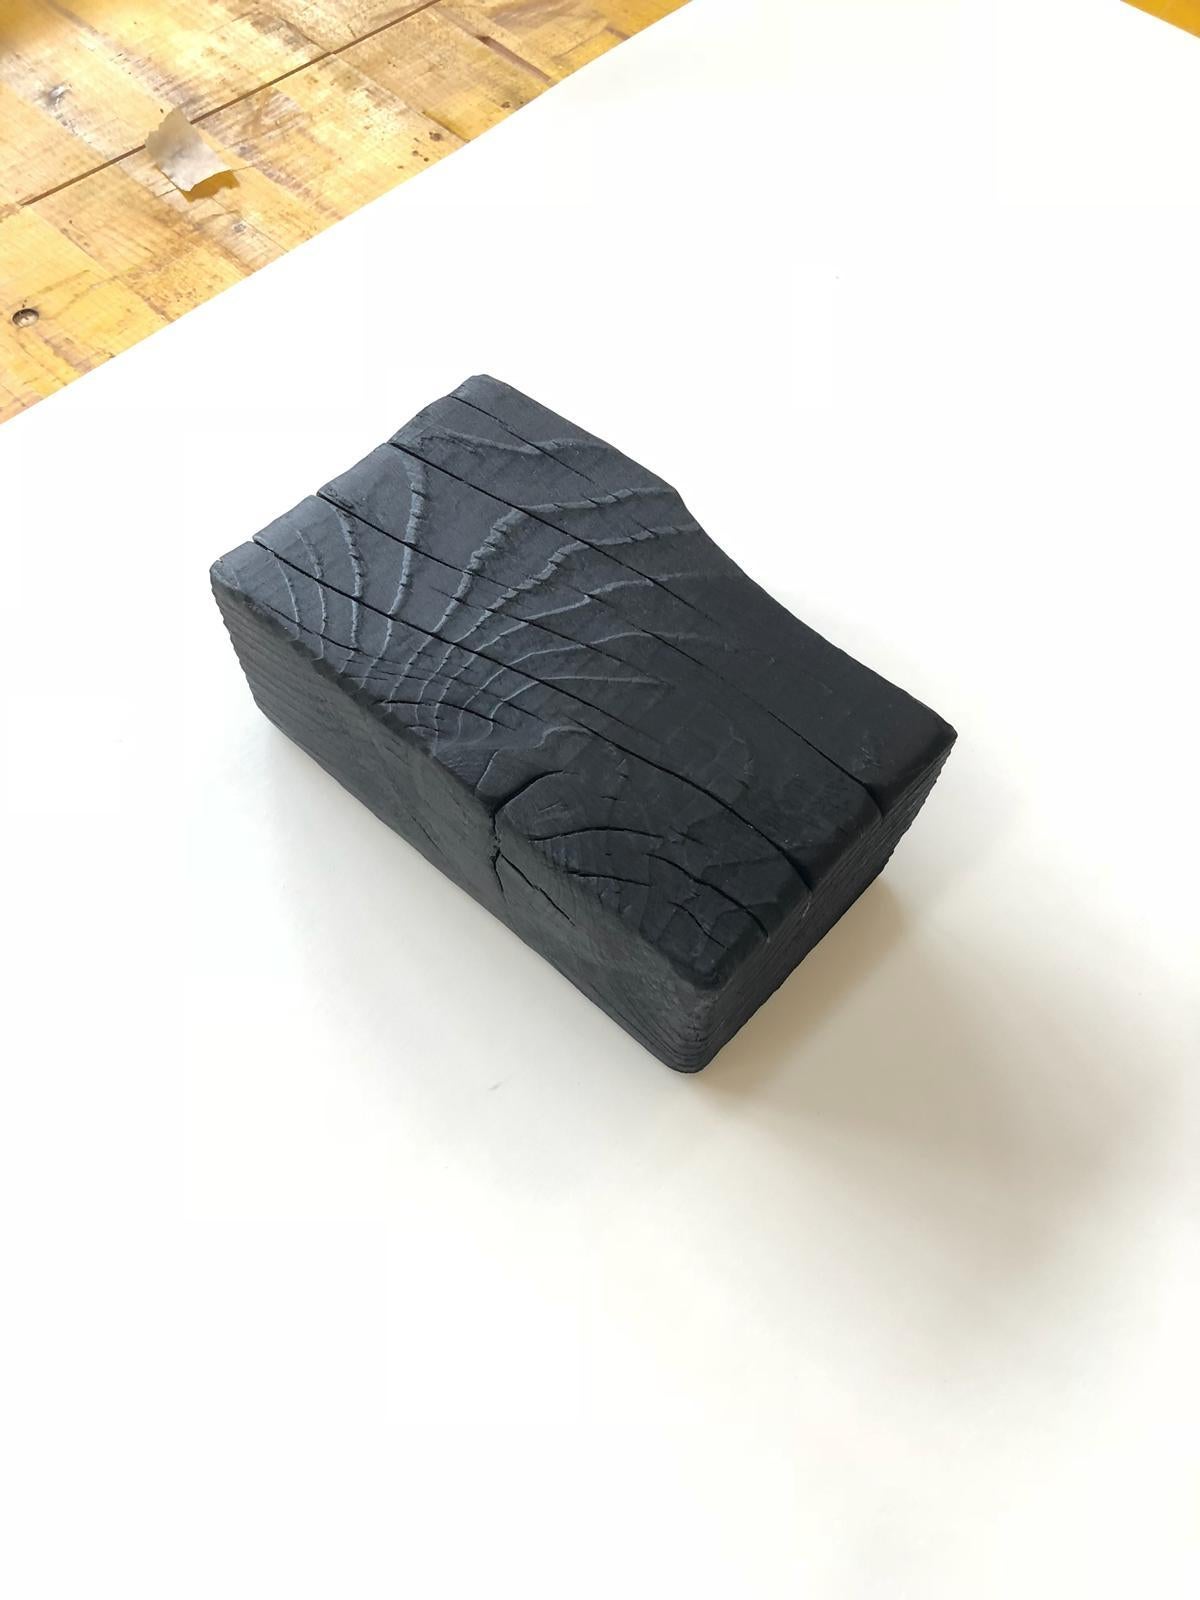 Contemporary Limited Edition Signed Charred Table, Reef V2 by Edizione Limitata For Sale 1